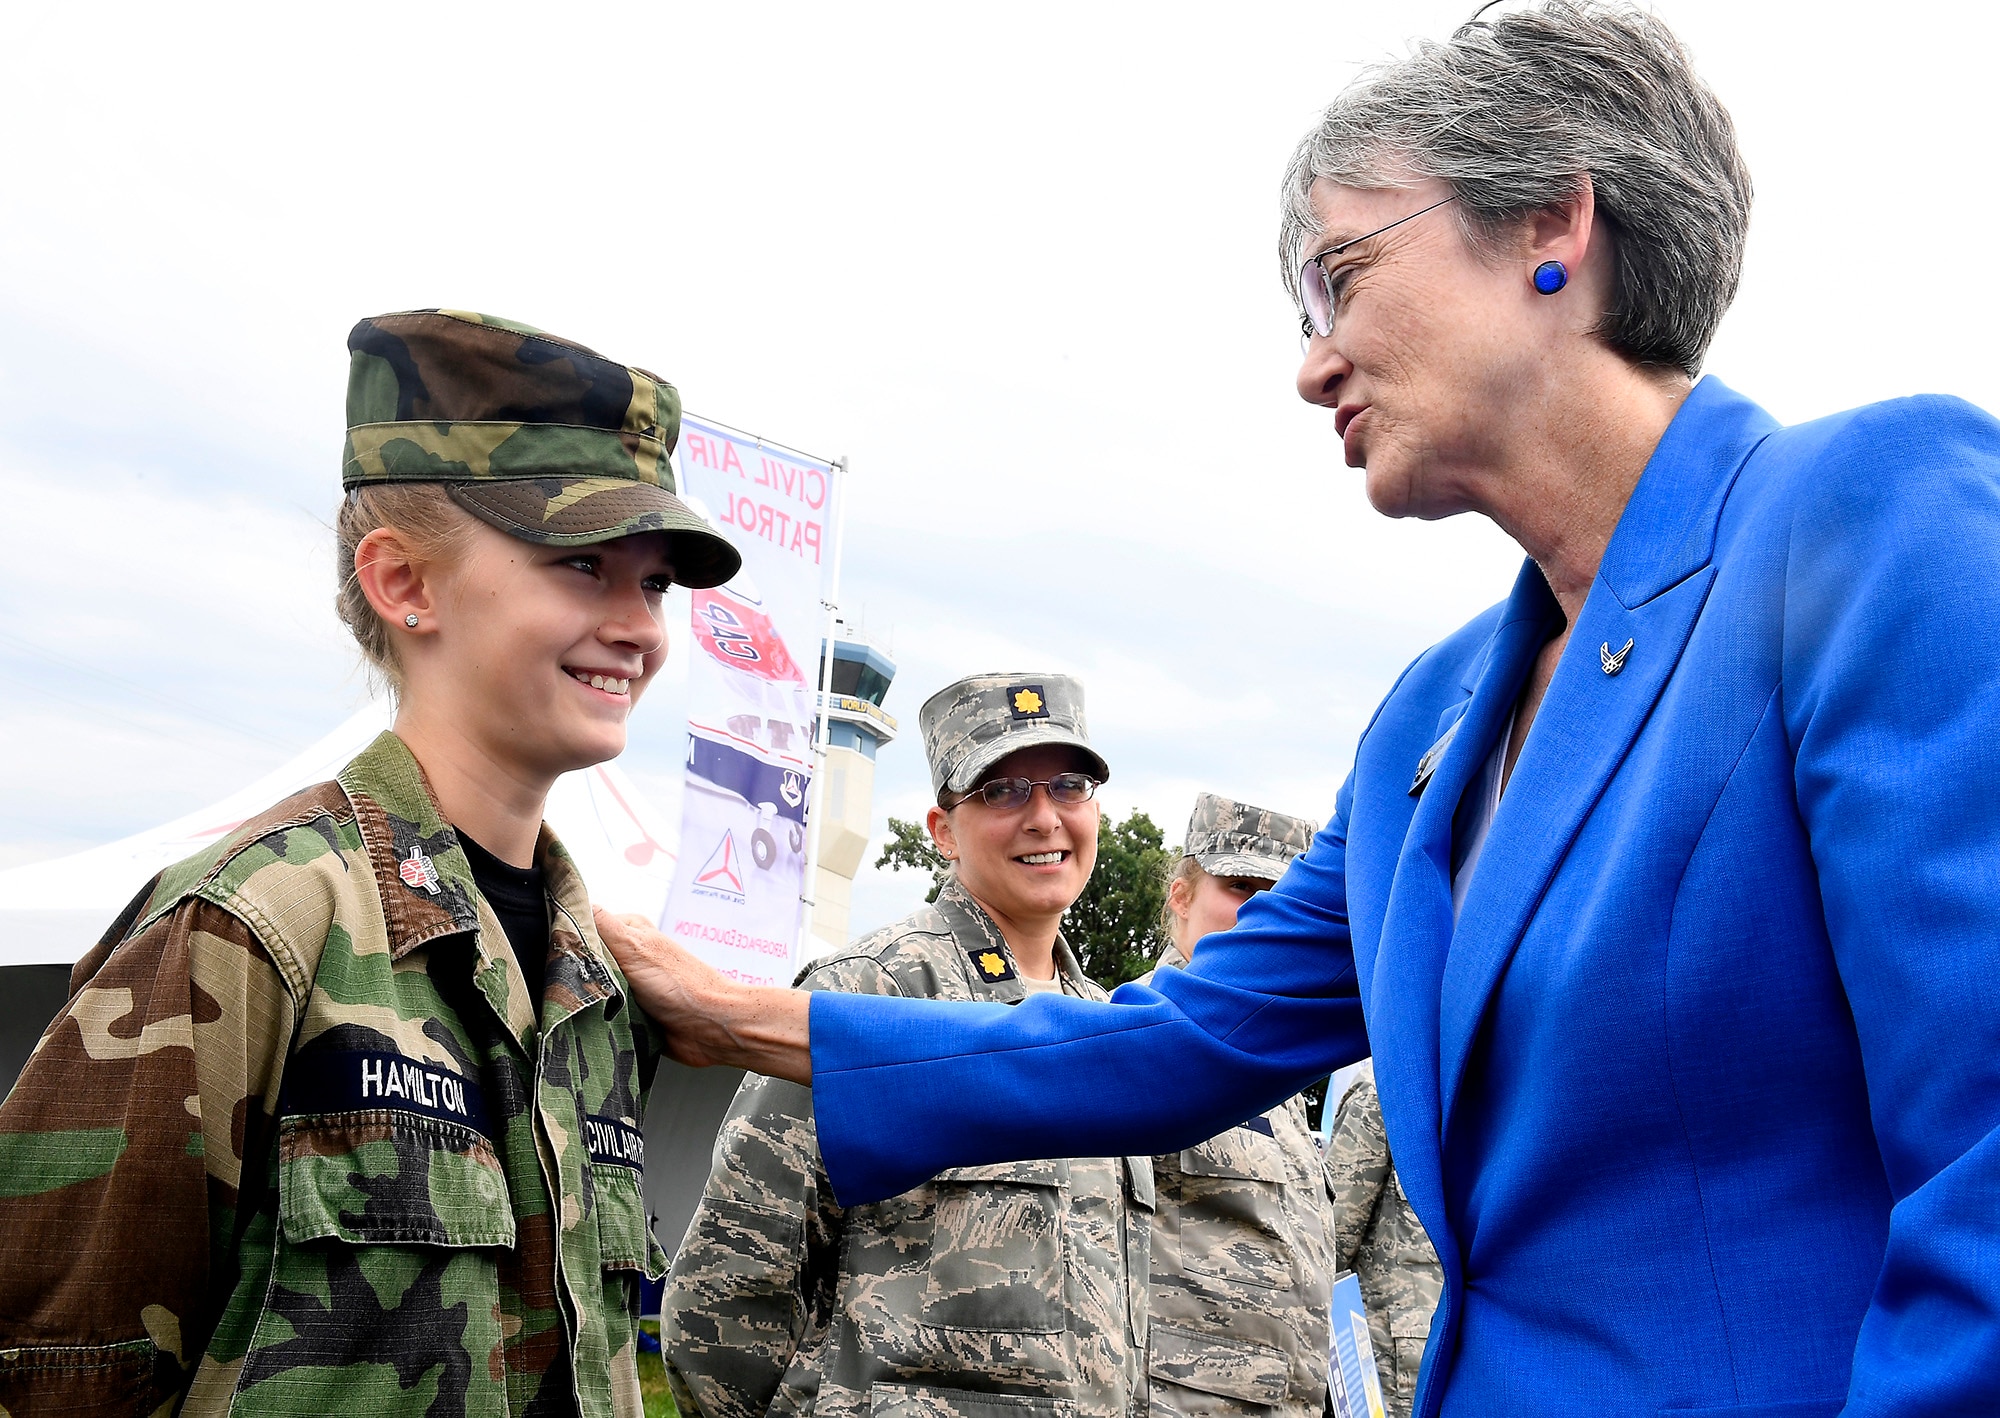 Secretary of the Air Force Heather Wilson encourages Wisconsin Civil Air Patrol Cadet Hamilton at the Experimental Aircraft Association's AirVenture 2017 in Oshkosh, Wisc., July 26, 2017.  (U.S. Air Force photo/Scott M. Ash)